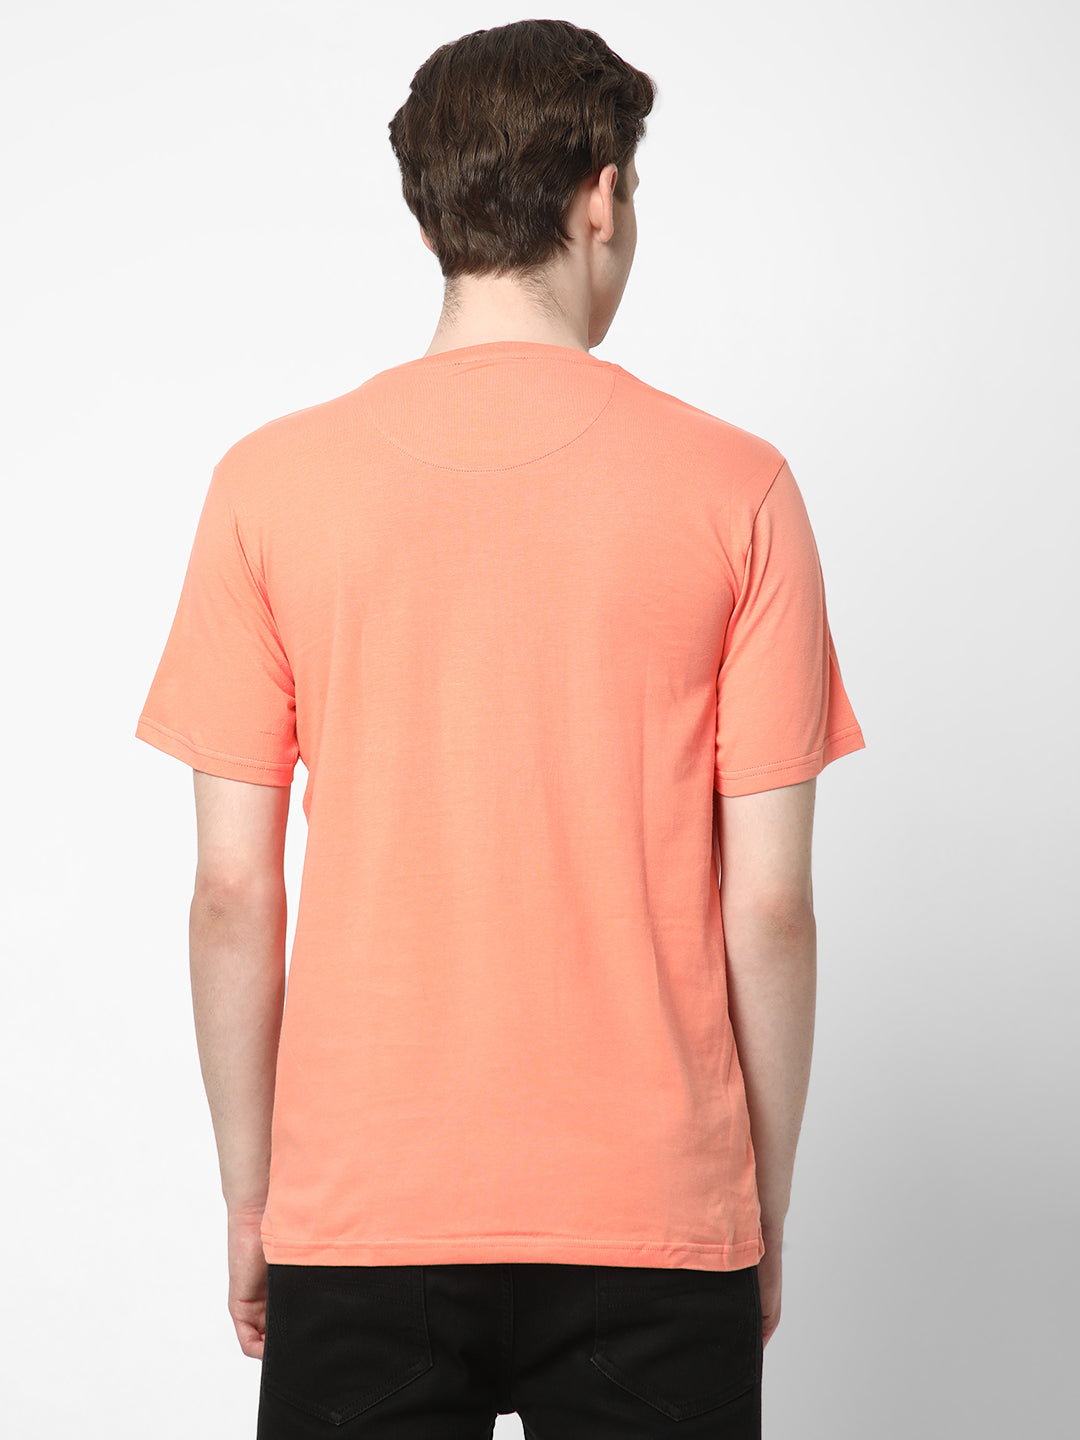 Cotstyle Cotton Fabrics Round Neck Short Length Plain Half Sleeve Casual & Daily Wear Men's T-Shirts -  Pack of 1 - Fusion Coral